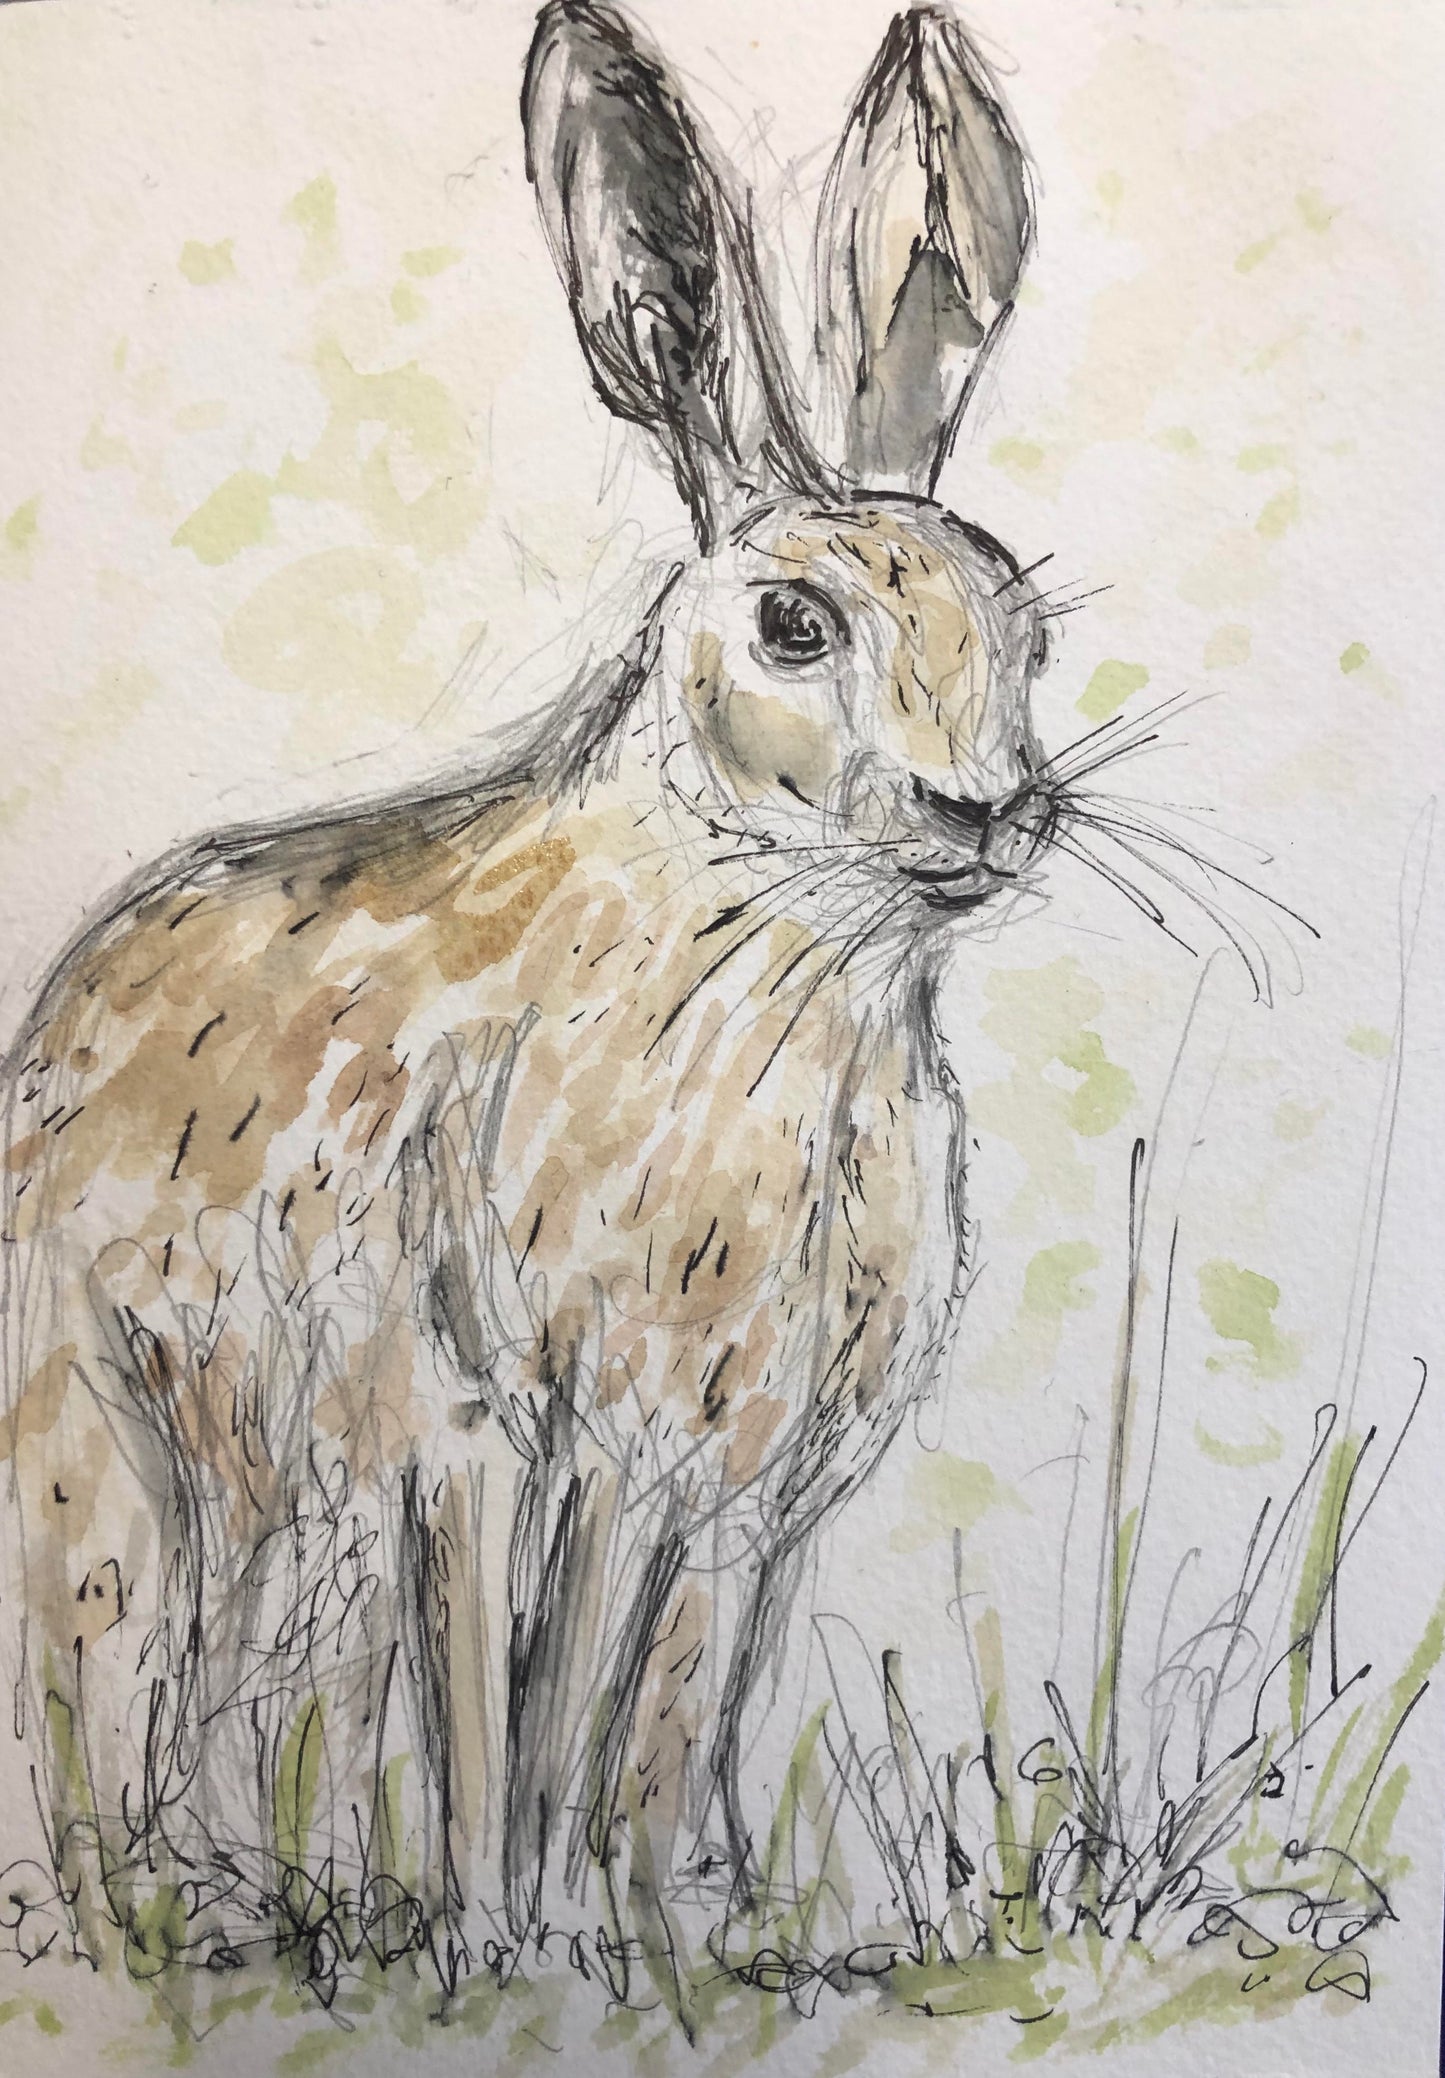 Long Eared Hare in the Wild